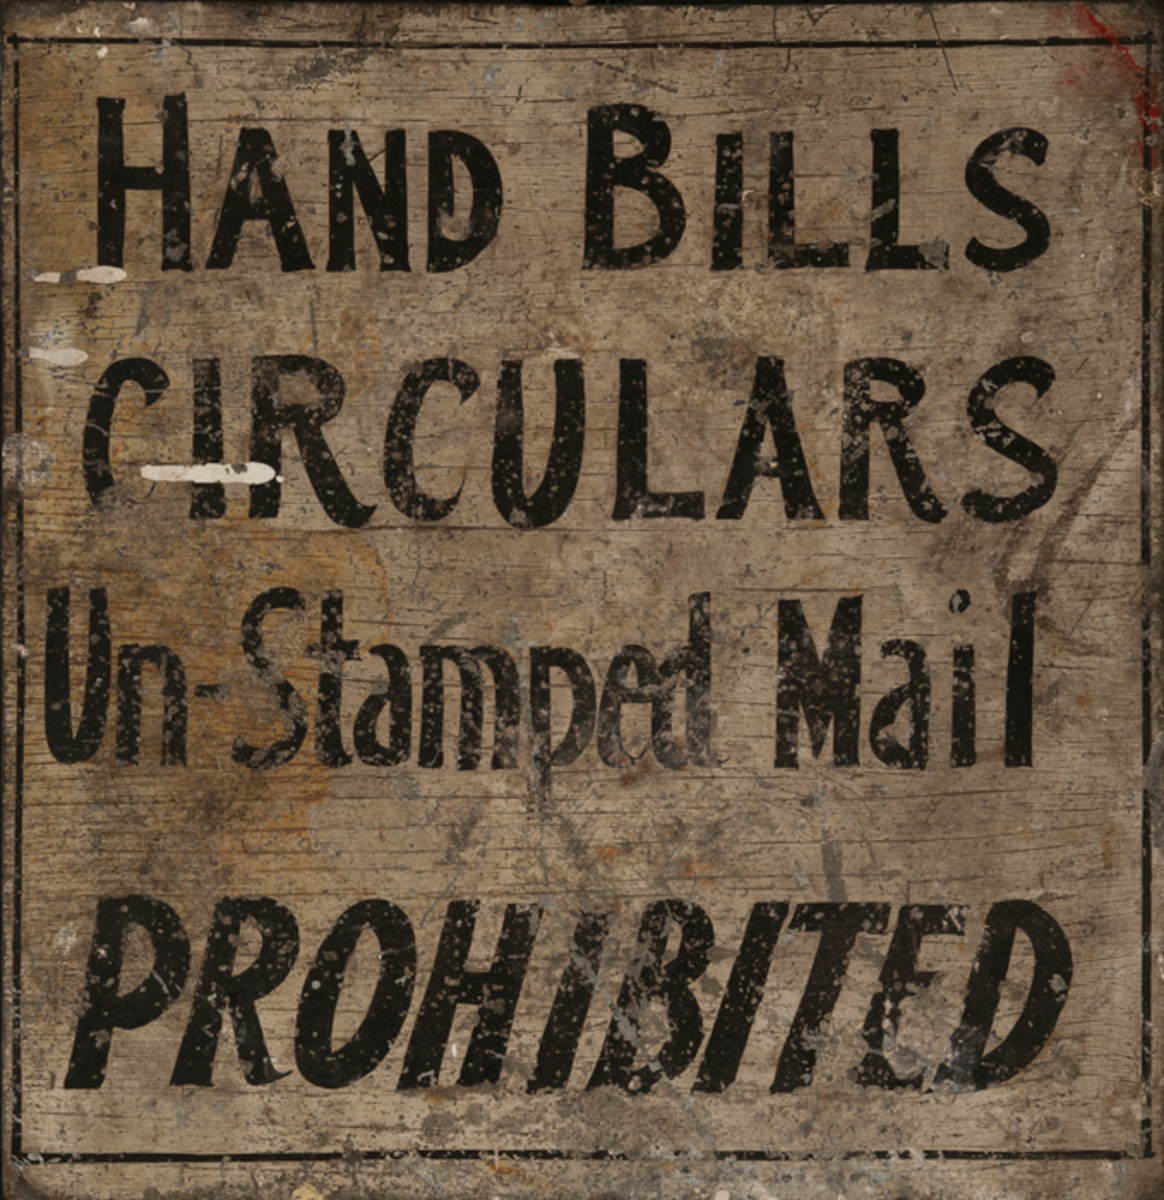 Hand Bills, Circulars, Un-Stamped Mail Prohibited, Original Painted Sign